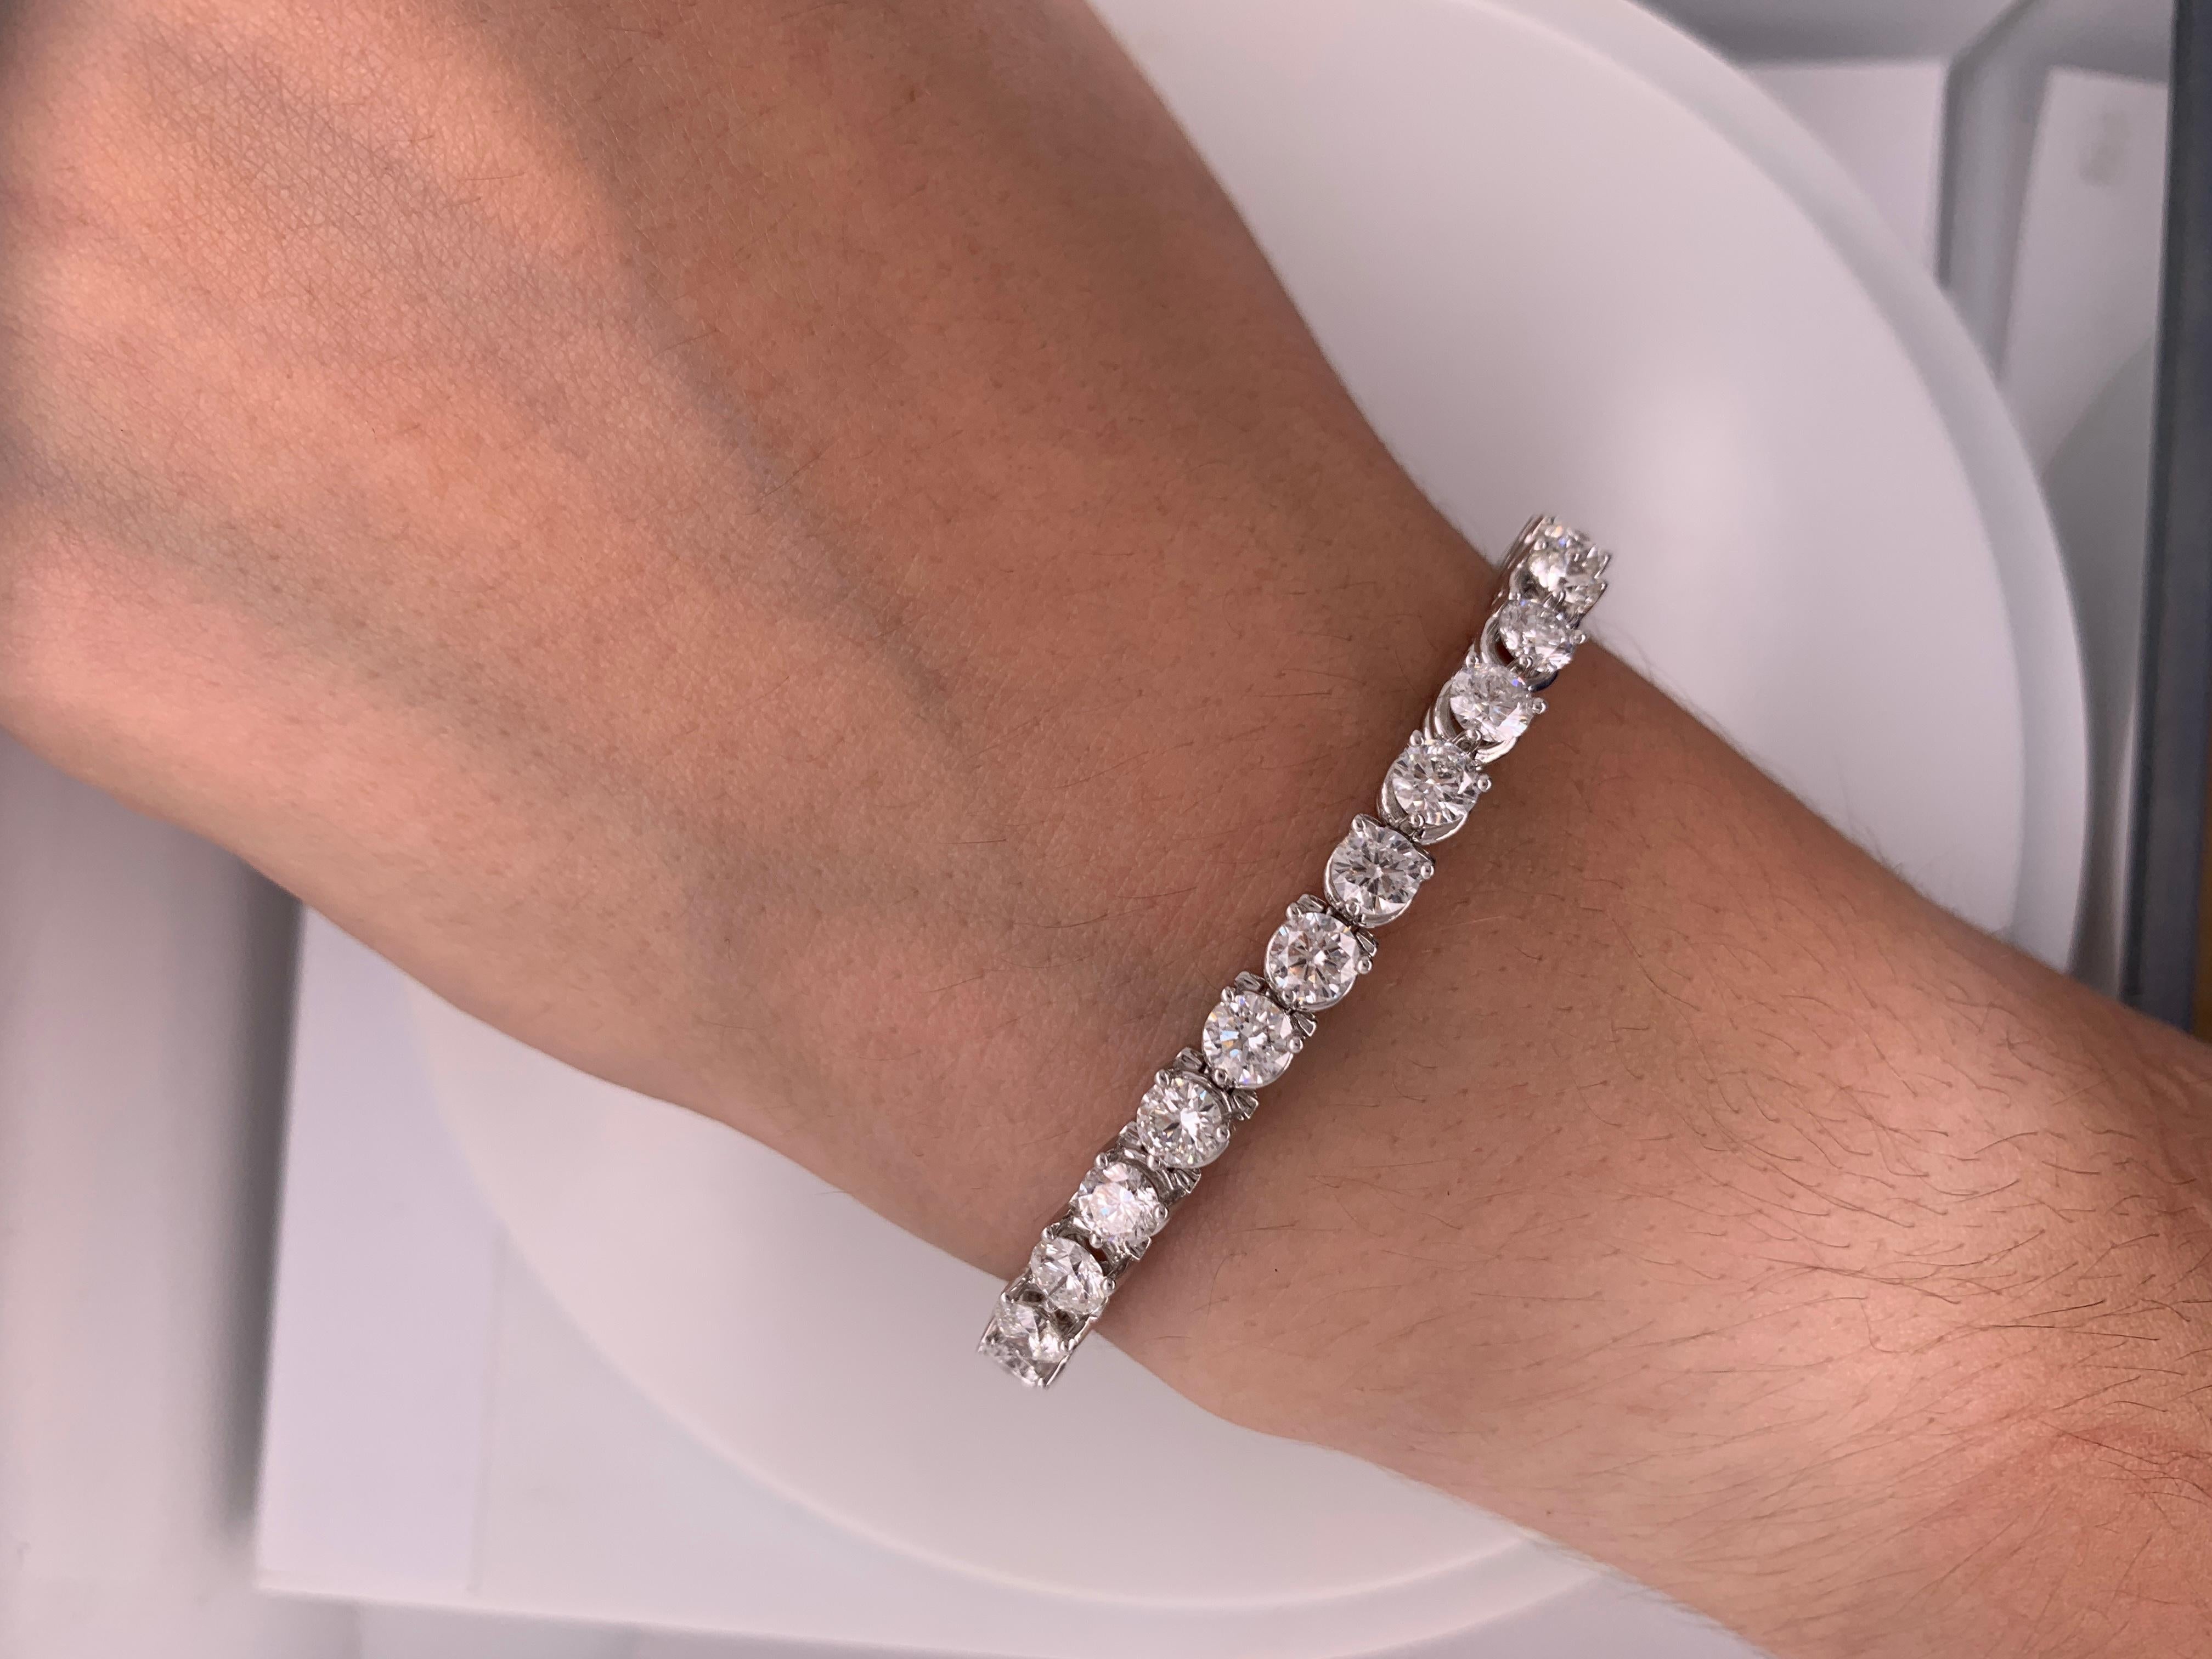 Stunning diamond tennis bracelet in three prong white gold diamond mounting! 

32 Round brilliant cut diamonds, totaling 13.20 Carats. Each stone approx. 0.41 Carats. set in very delicate, timeless 18K White gold diamond mounting. 

Diamond